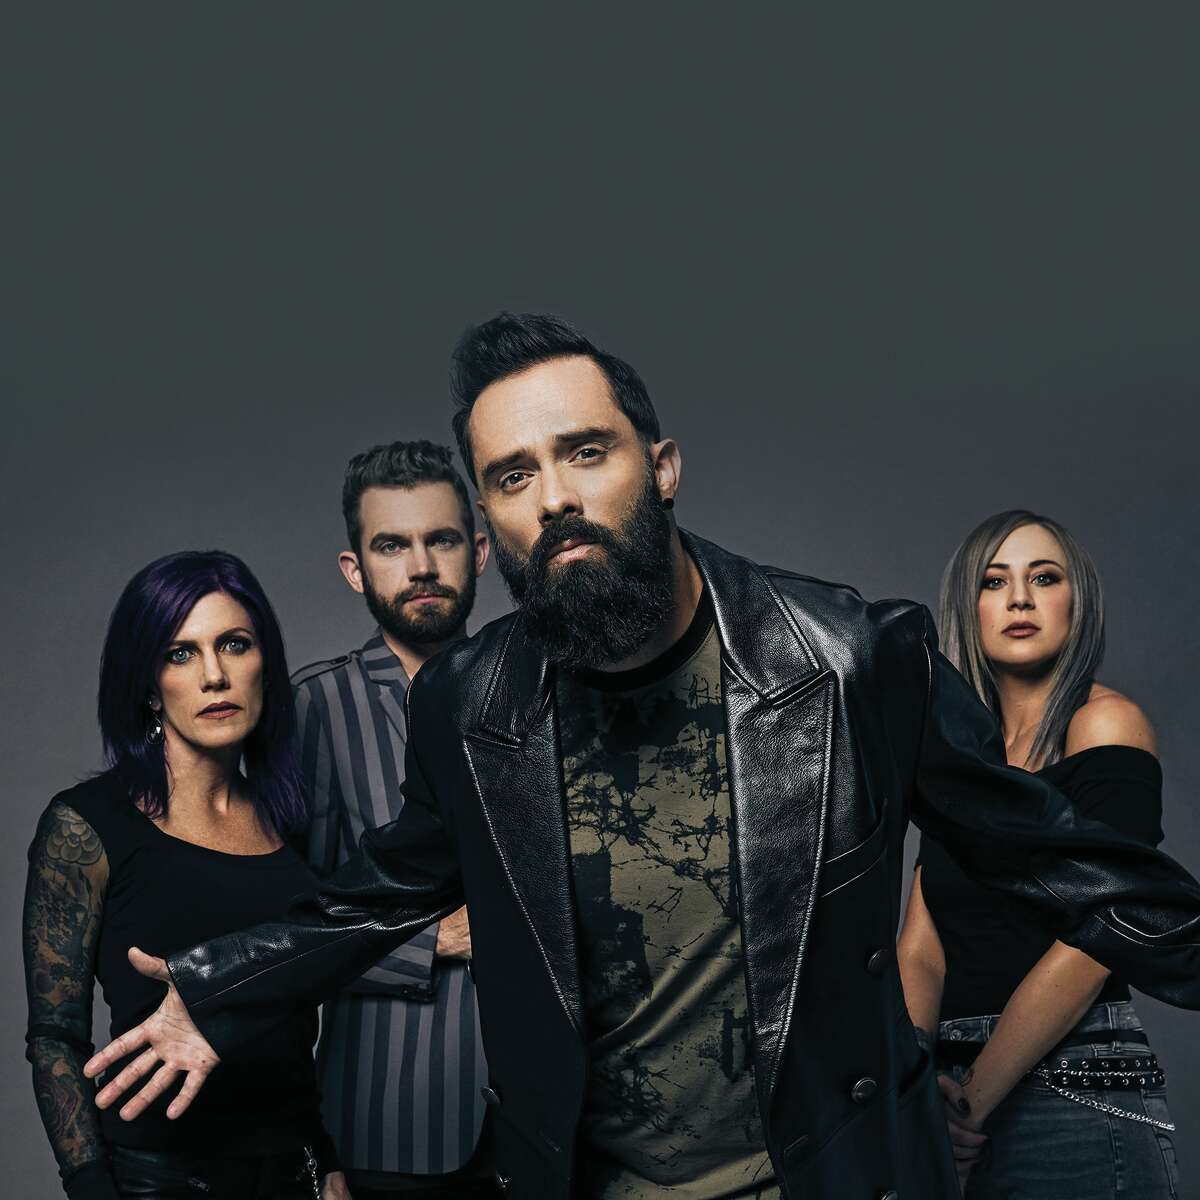 Skillet is back with a deluxe version of their 2022 album “Dominion,” called “Dominion: Day of Destiny,” which includes five additional songs, including the single “Finish Line” (with guest vocalist Adam Gauntier of Three Days Grace).